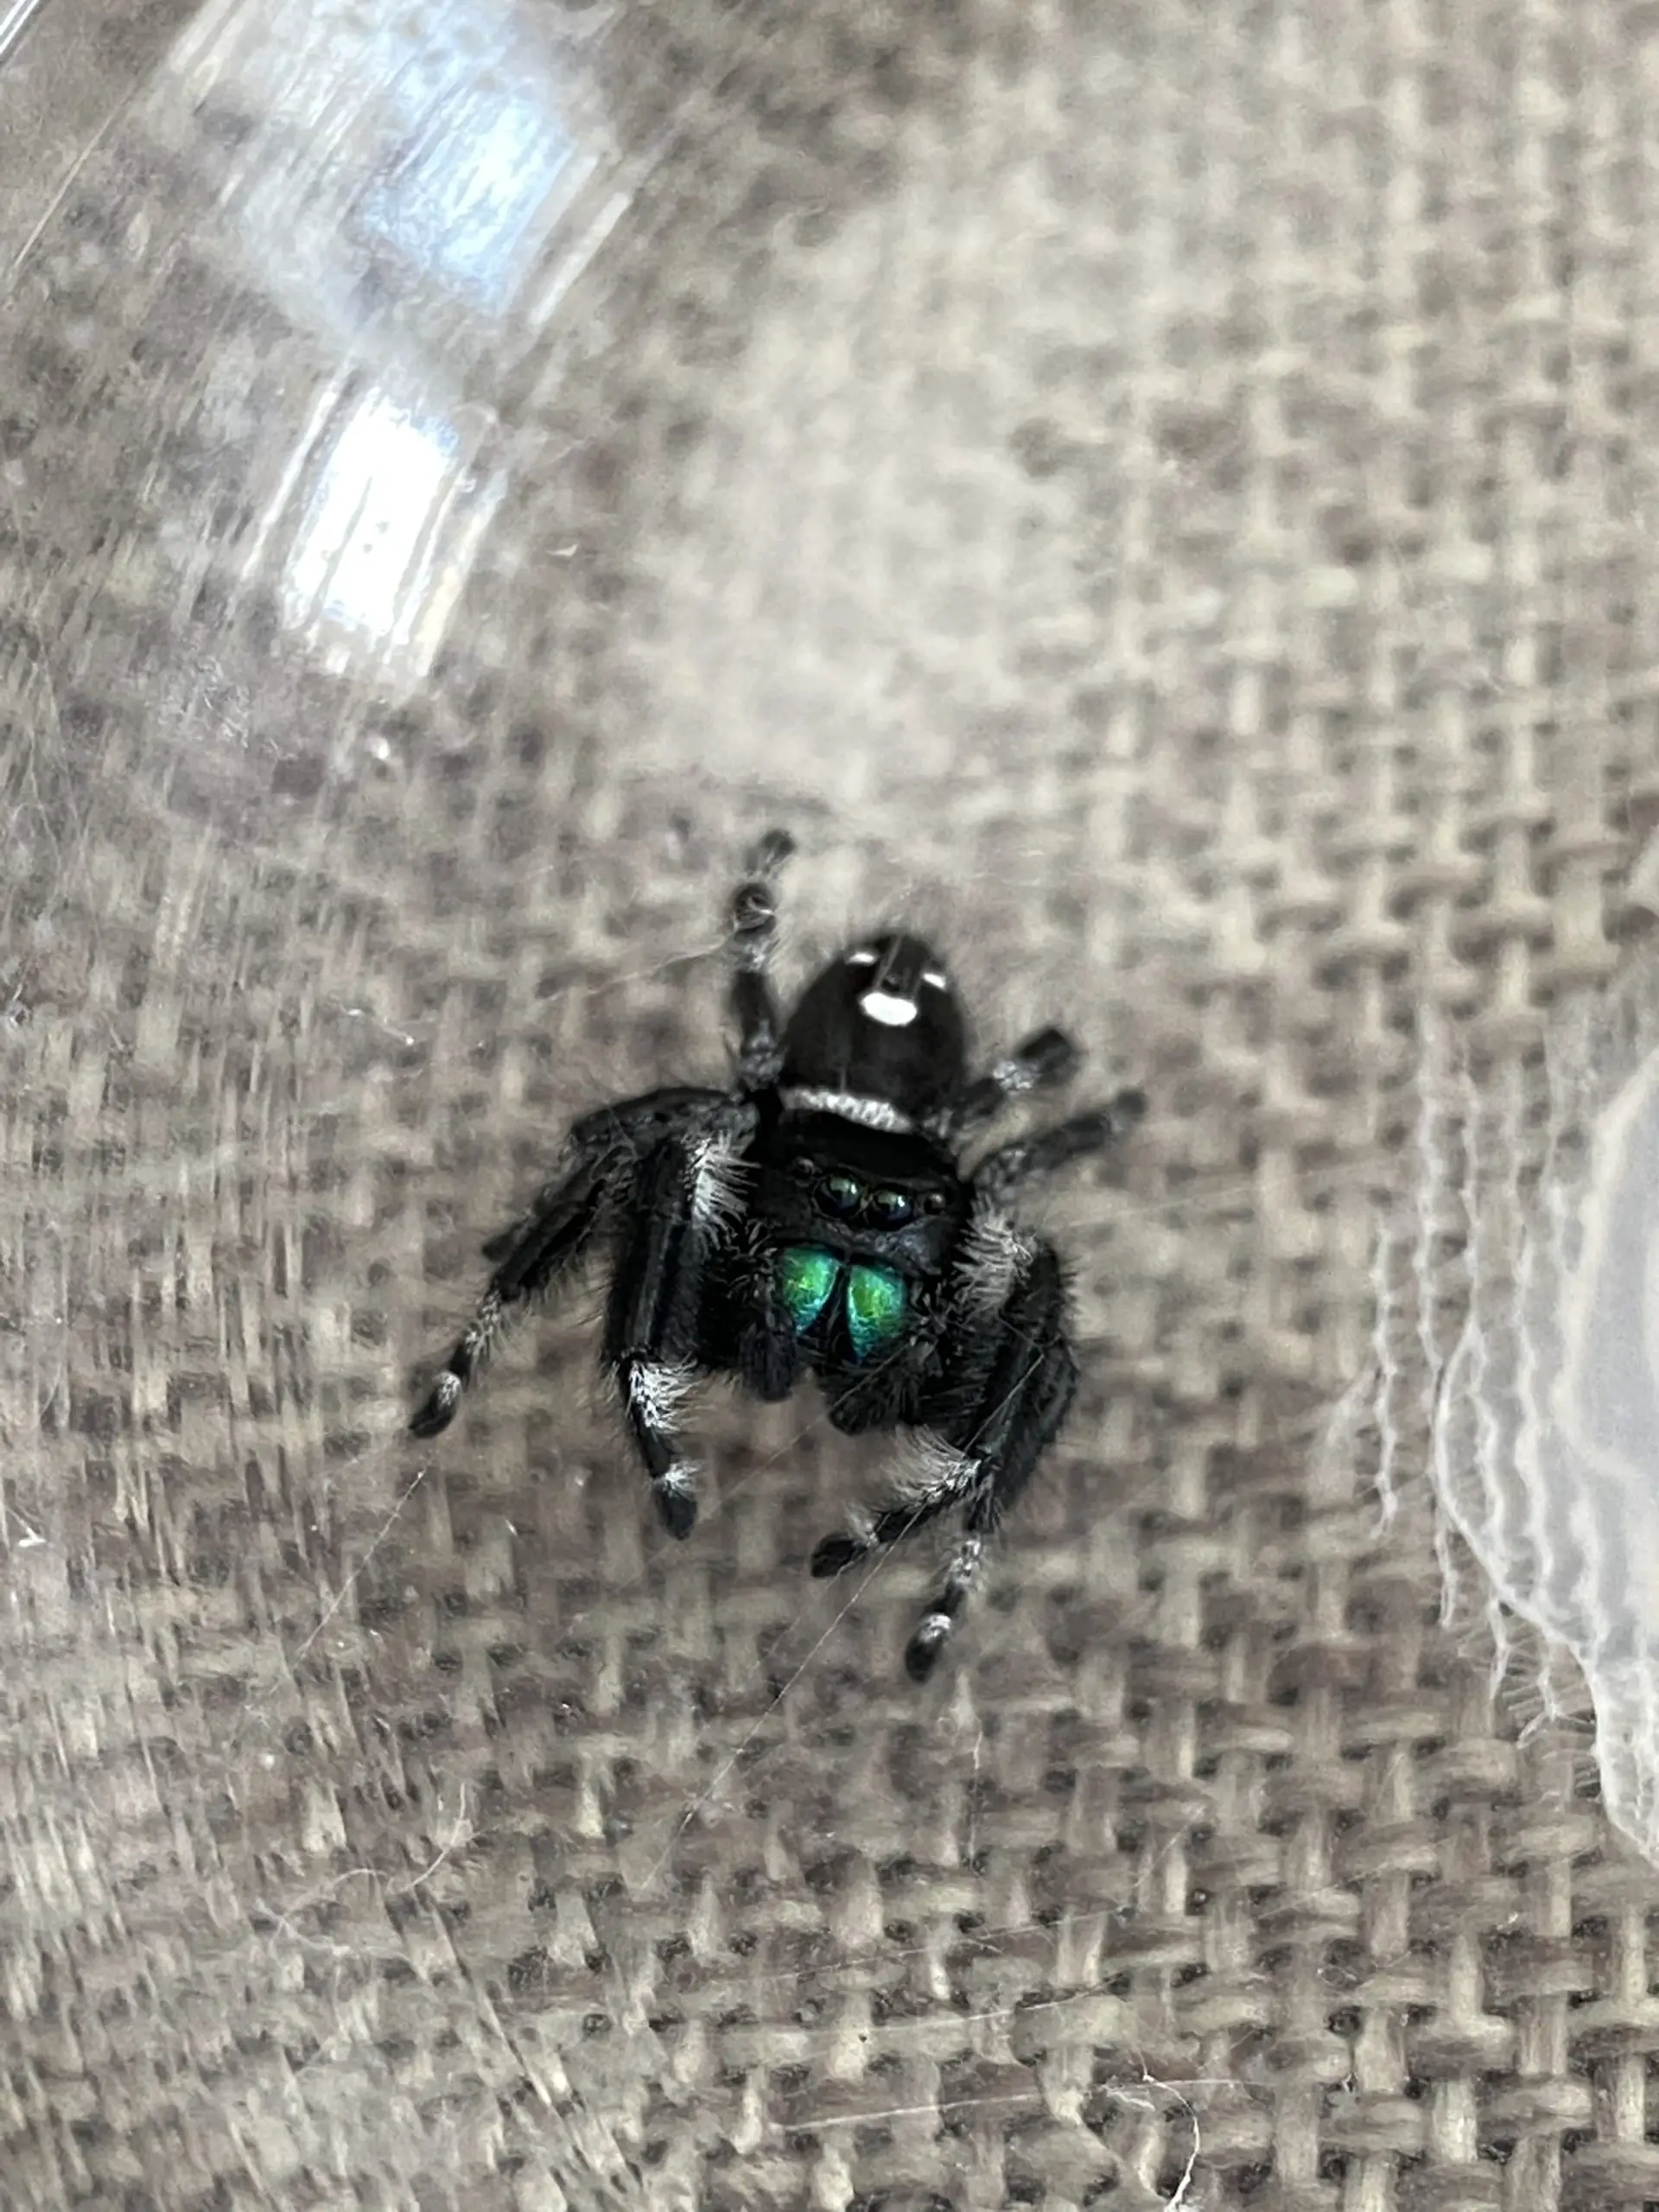 jumping spider showing chelicerae